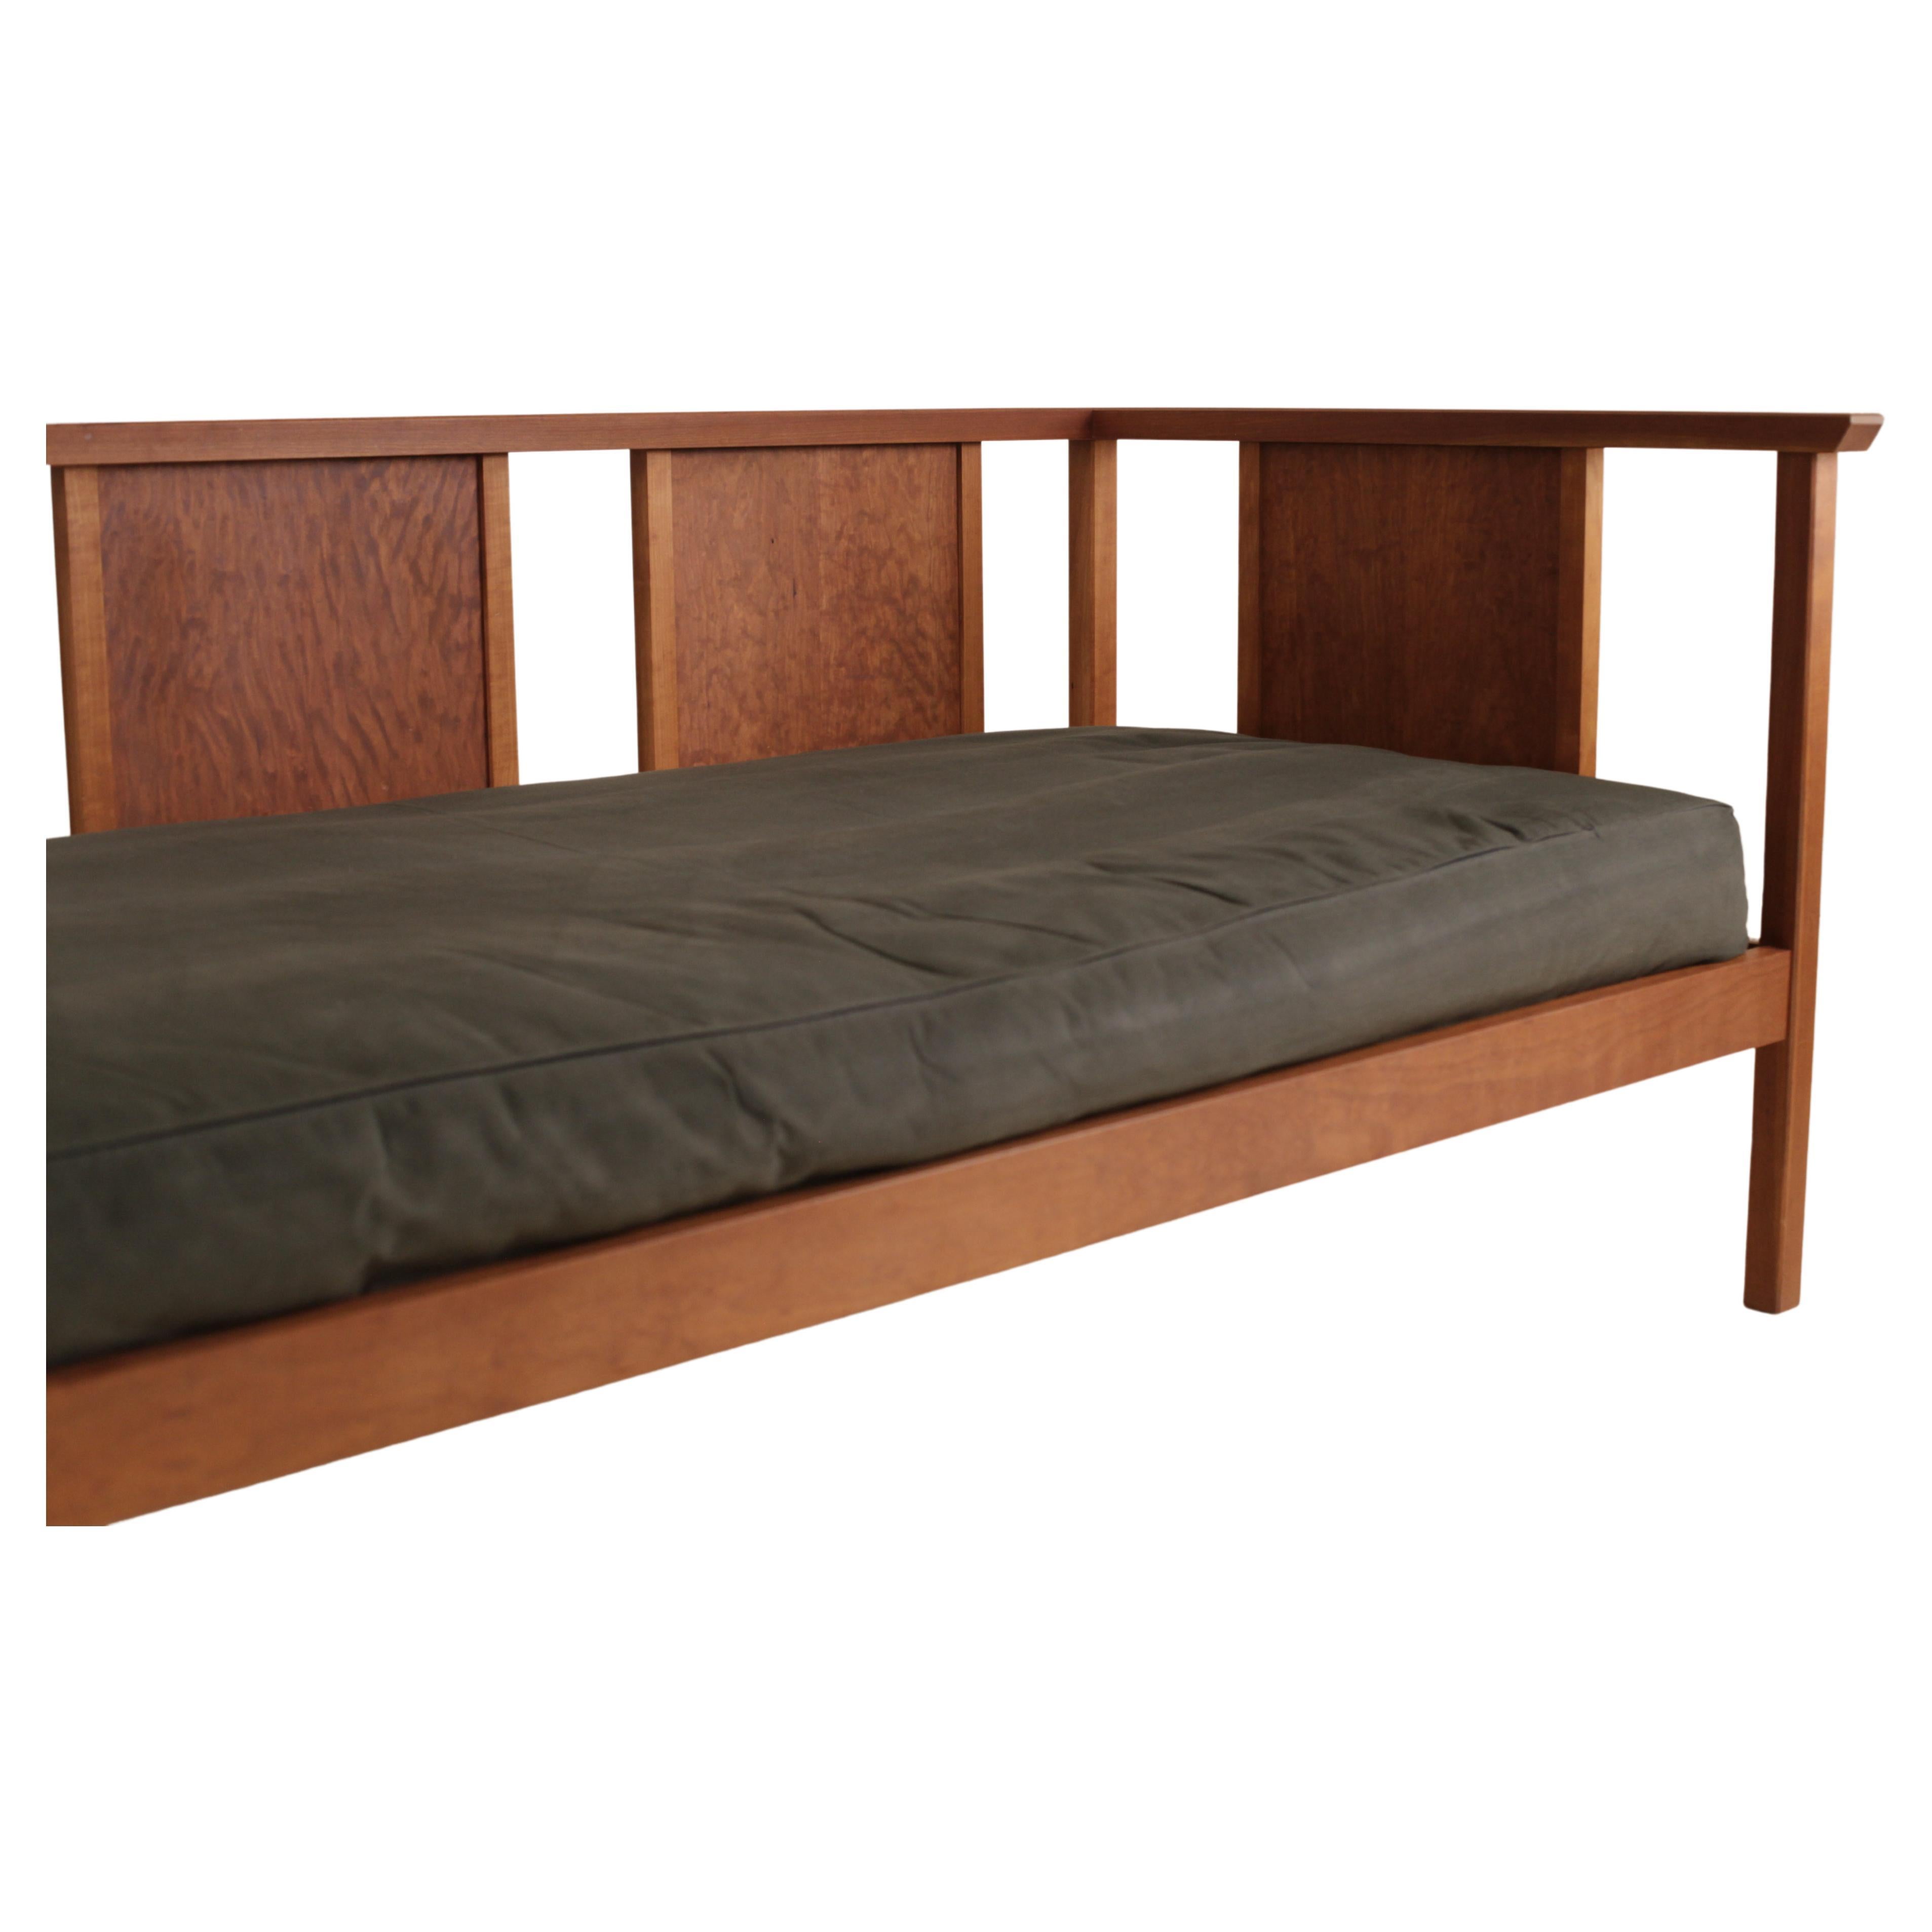 Oiled Mid-Century Inspired Daybed or Couch in Cherry by Boyd & Allister  For Sale